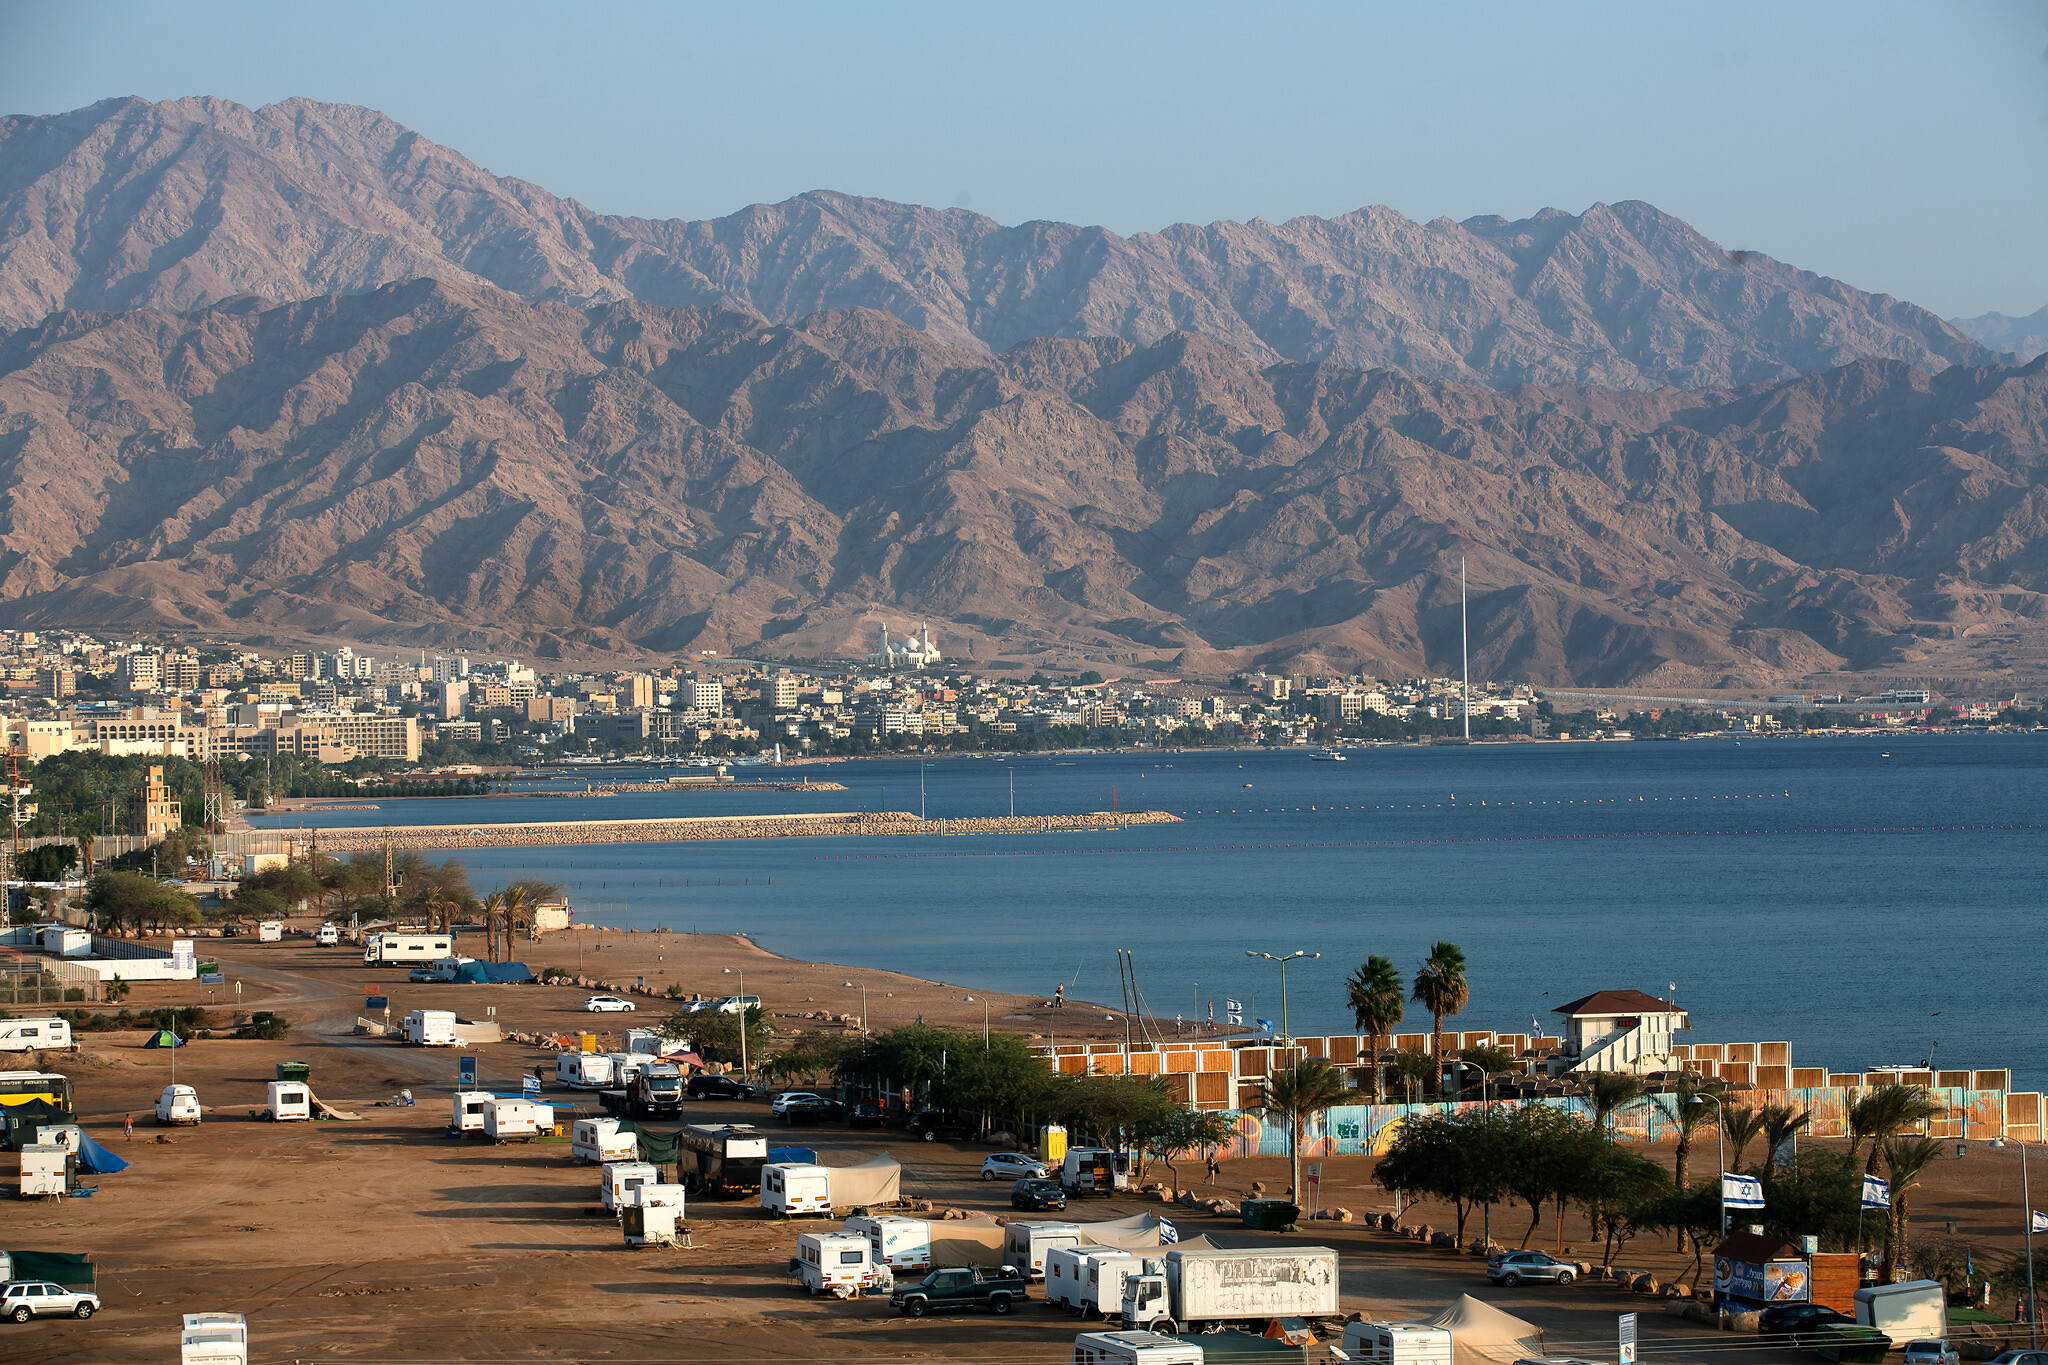 Eilat's neighbor beckons tourists vacation prices | The Times of Israel